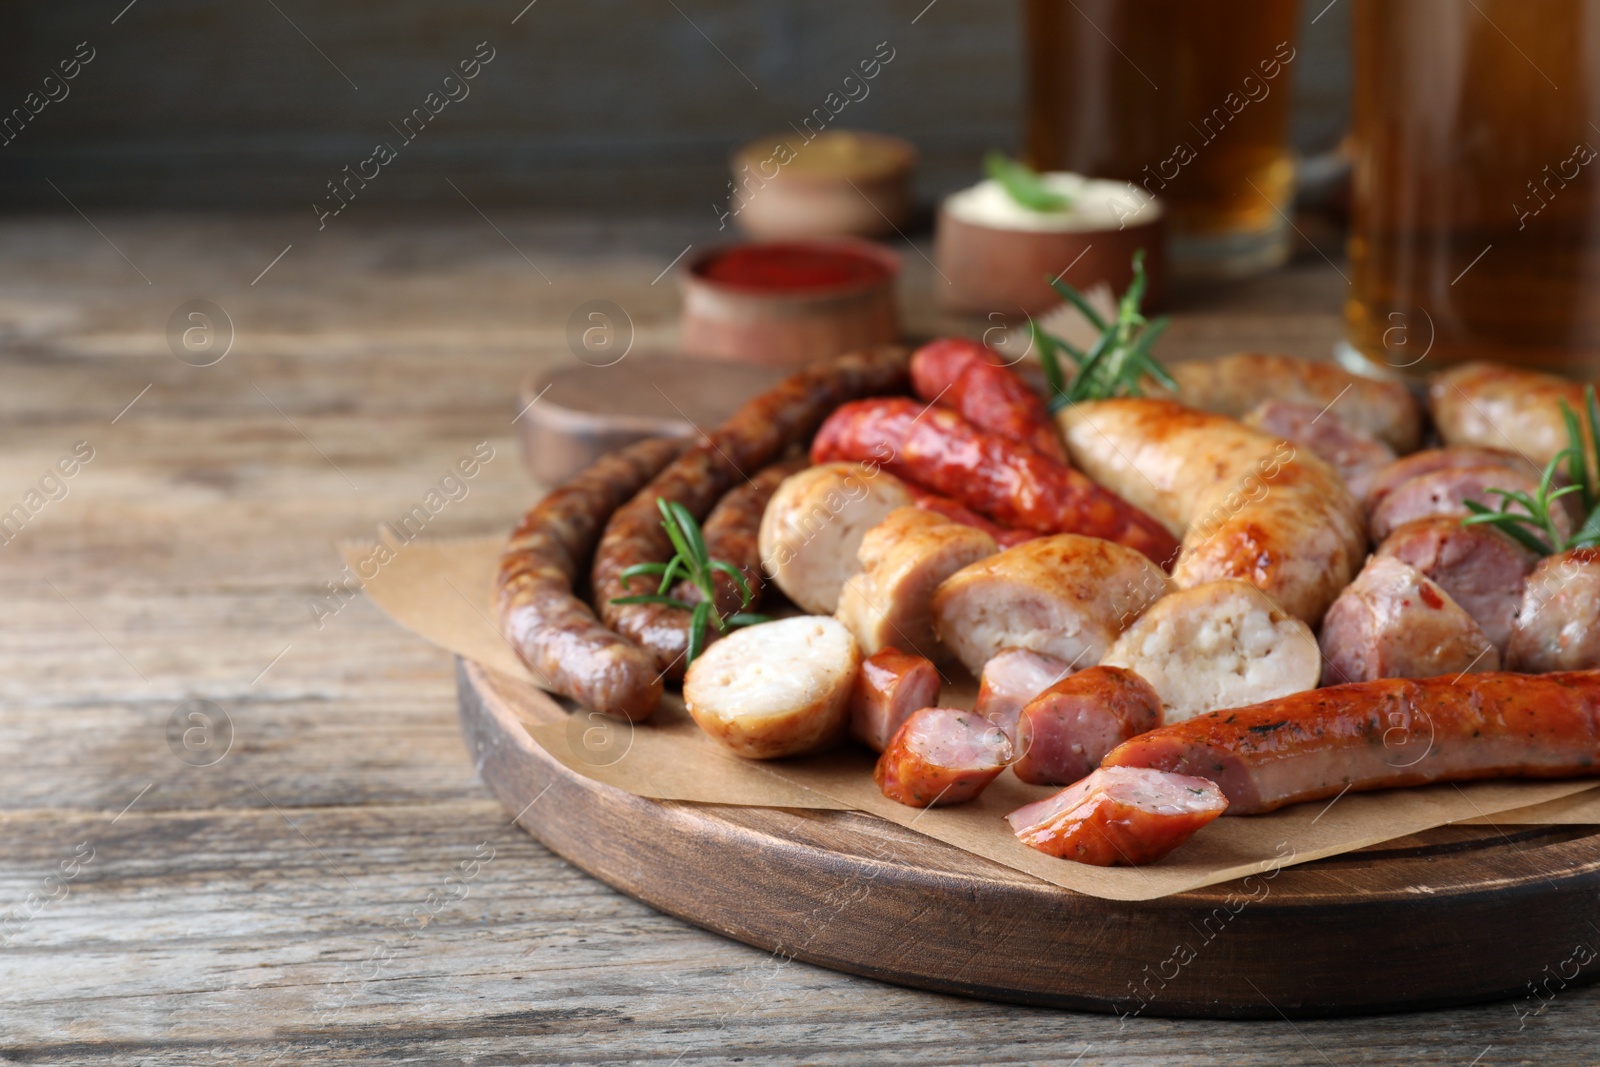 Photo of Set of different tasty snacks and beer on wooden table, closeup view. Space for text